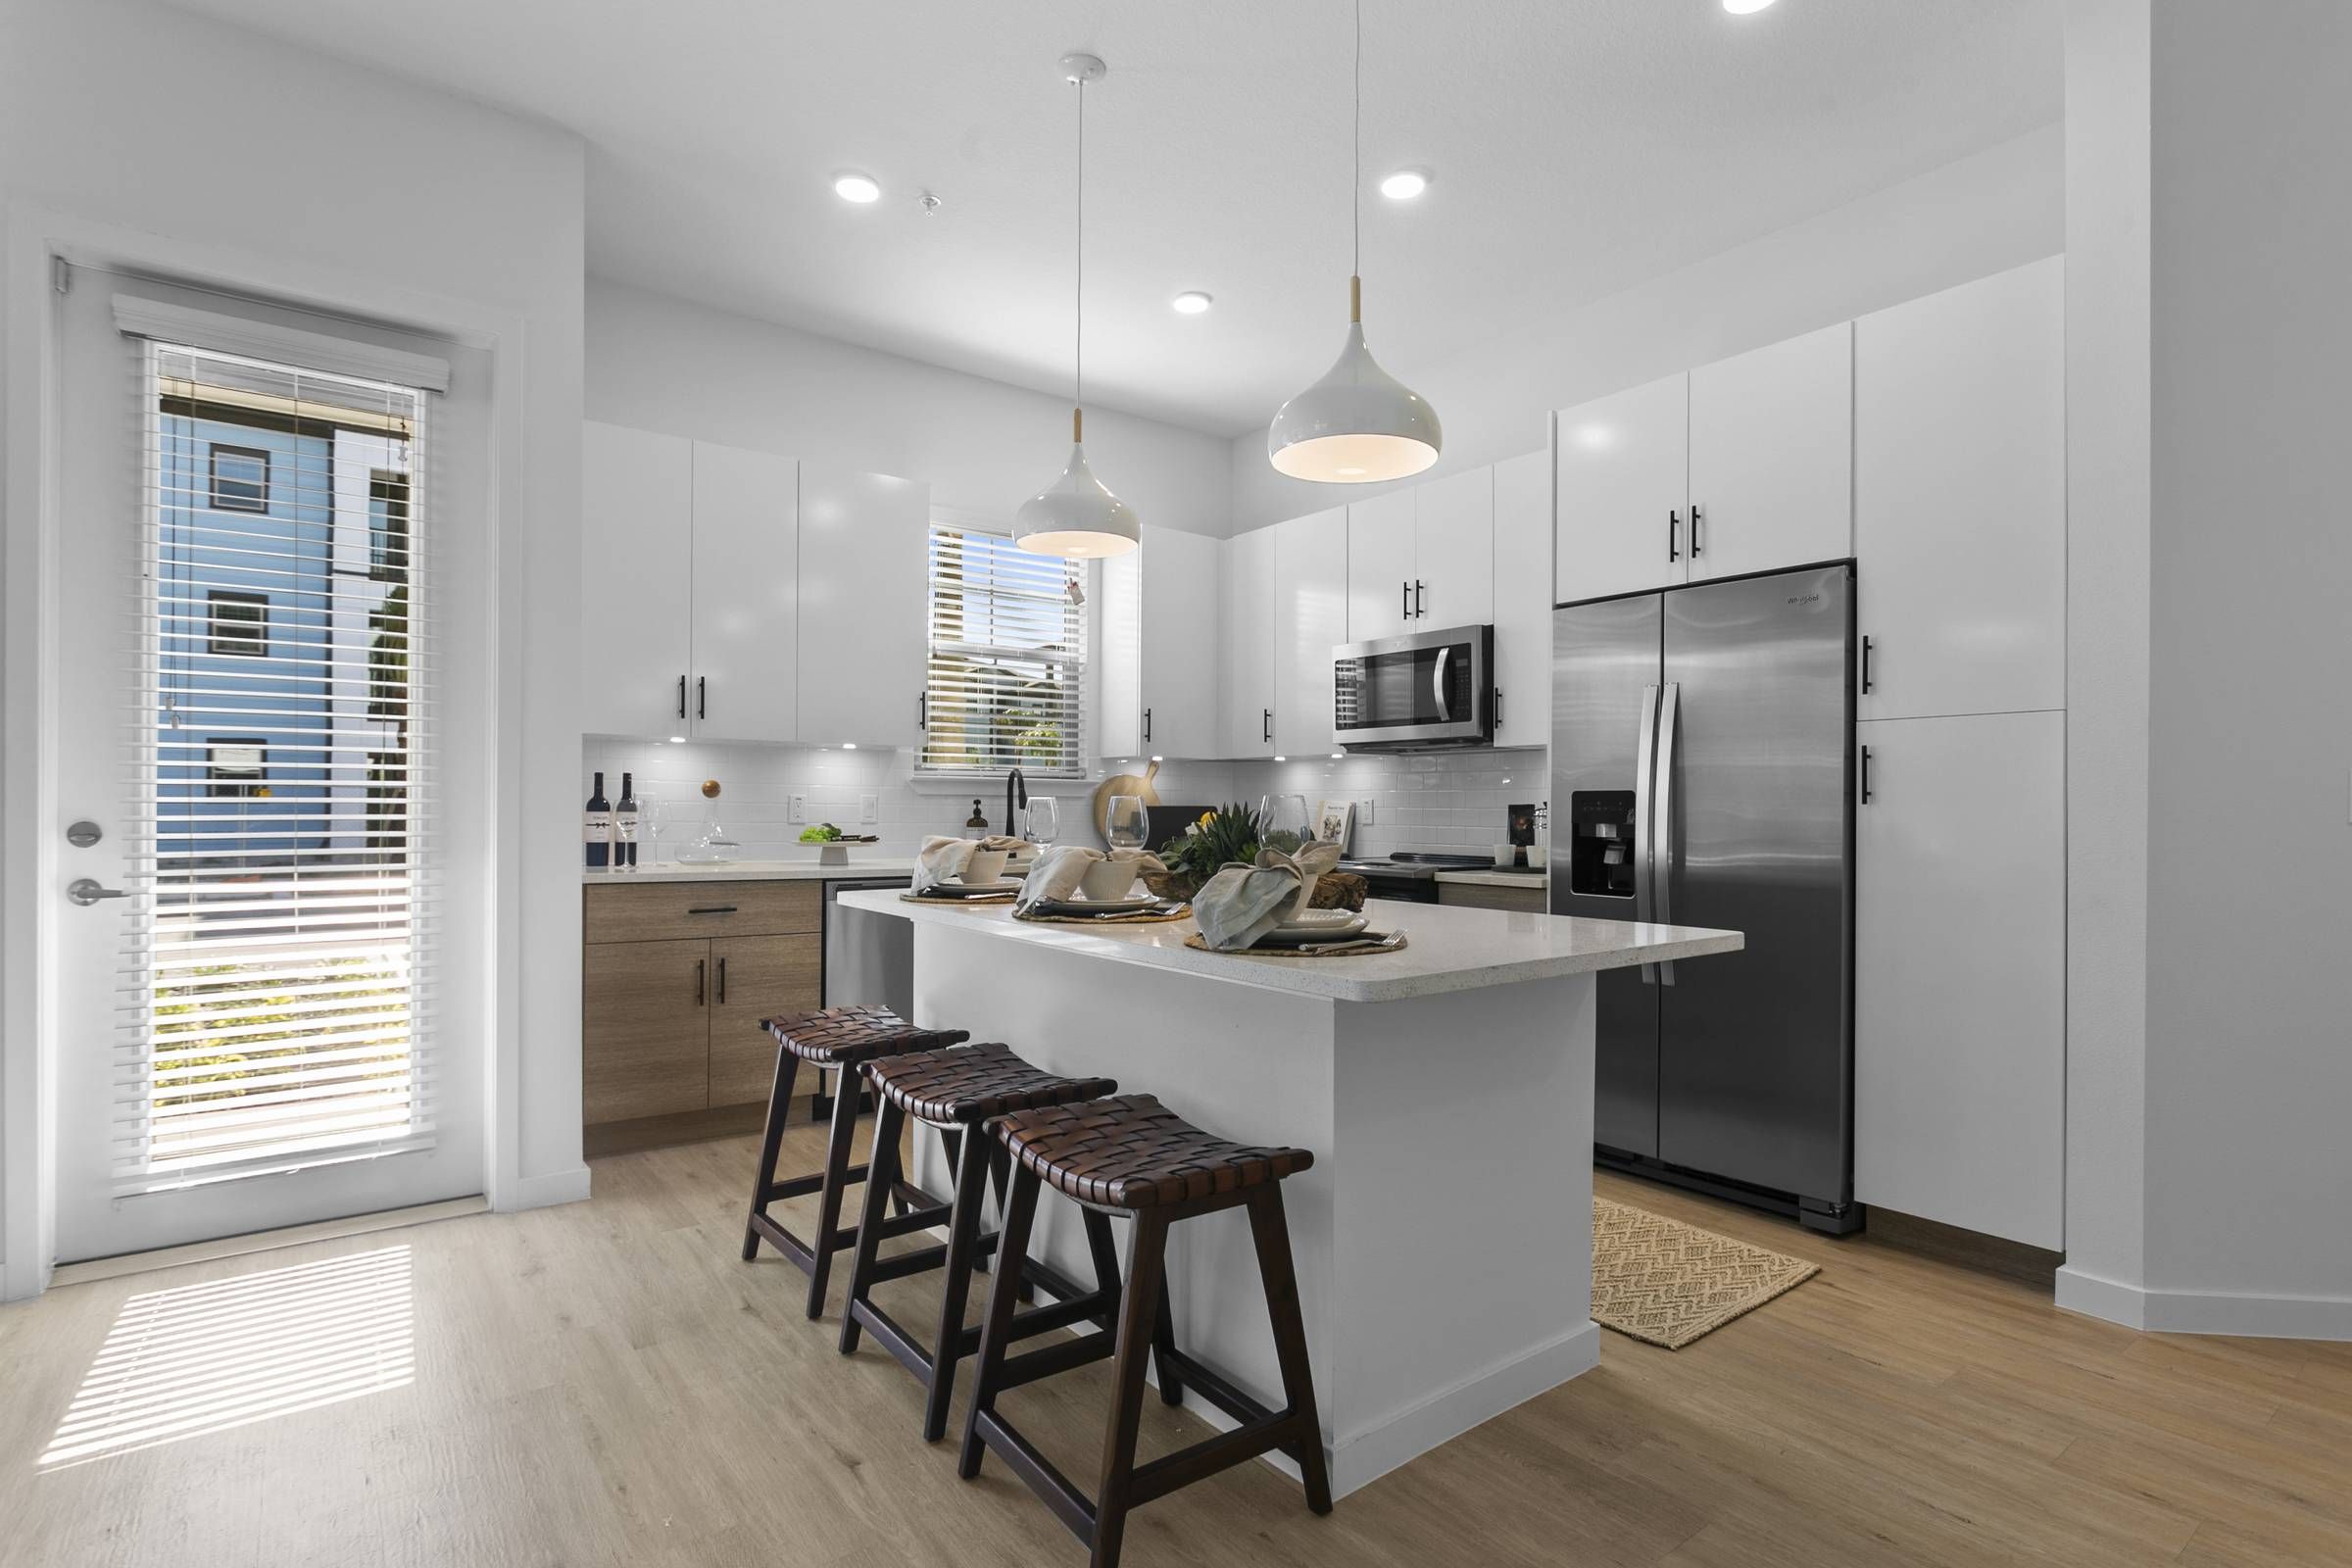 A bright kitchen with white cabinets, stainless steel appliances, and bar seating at Alta Clearwater.